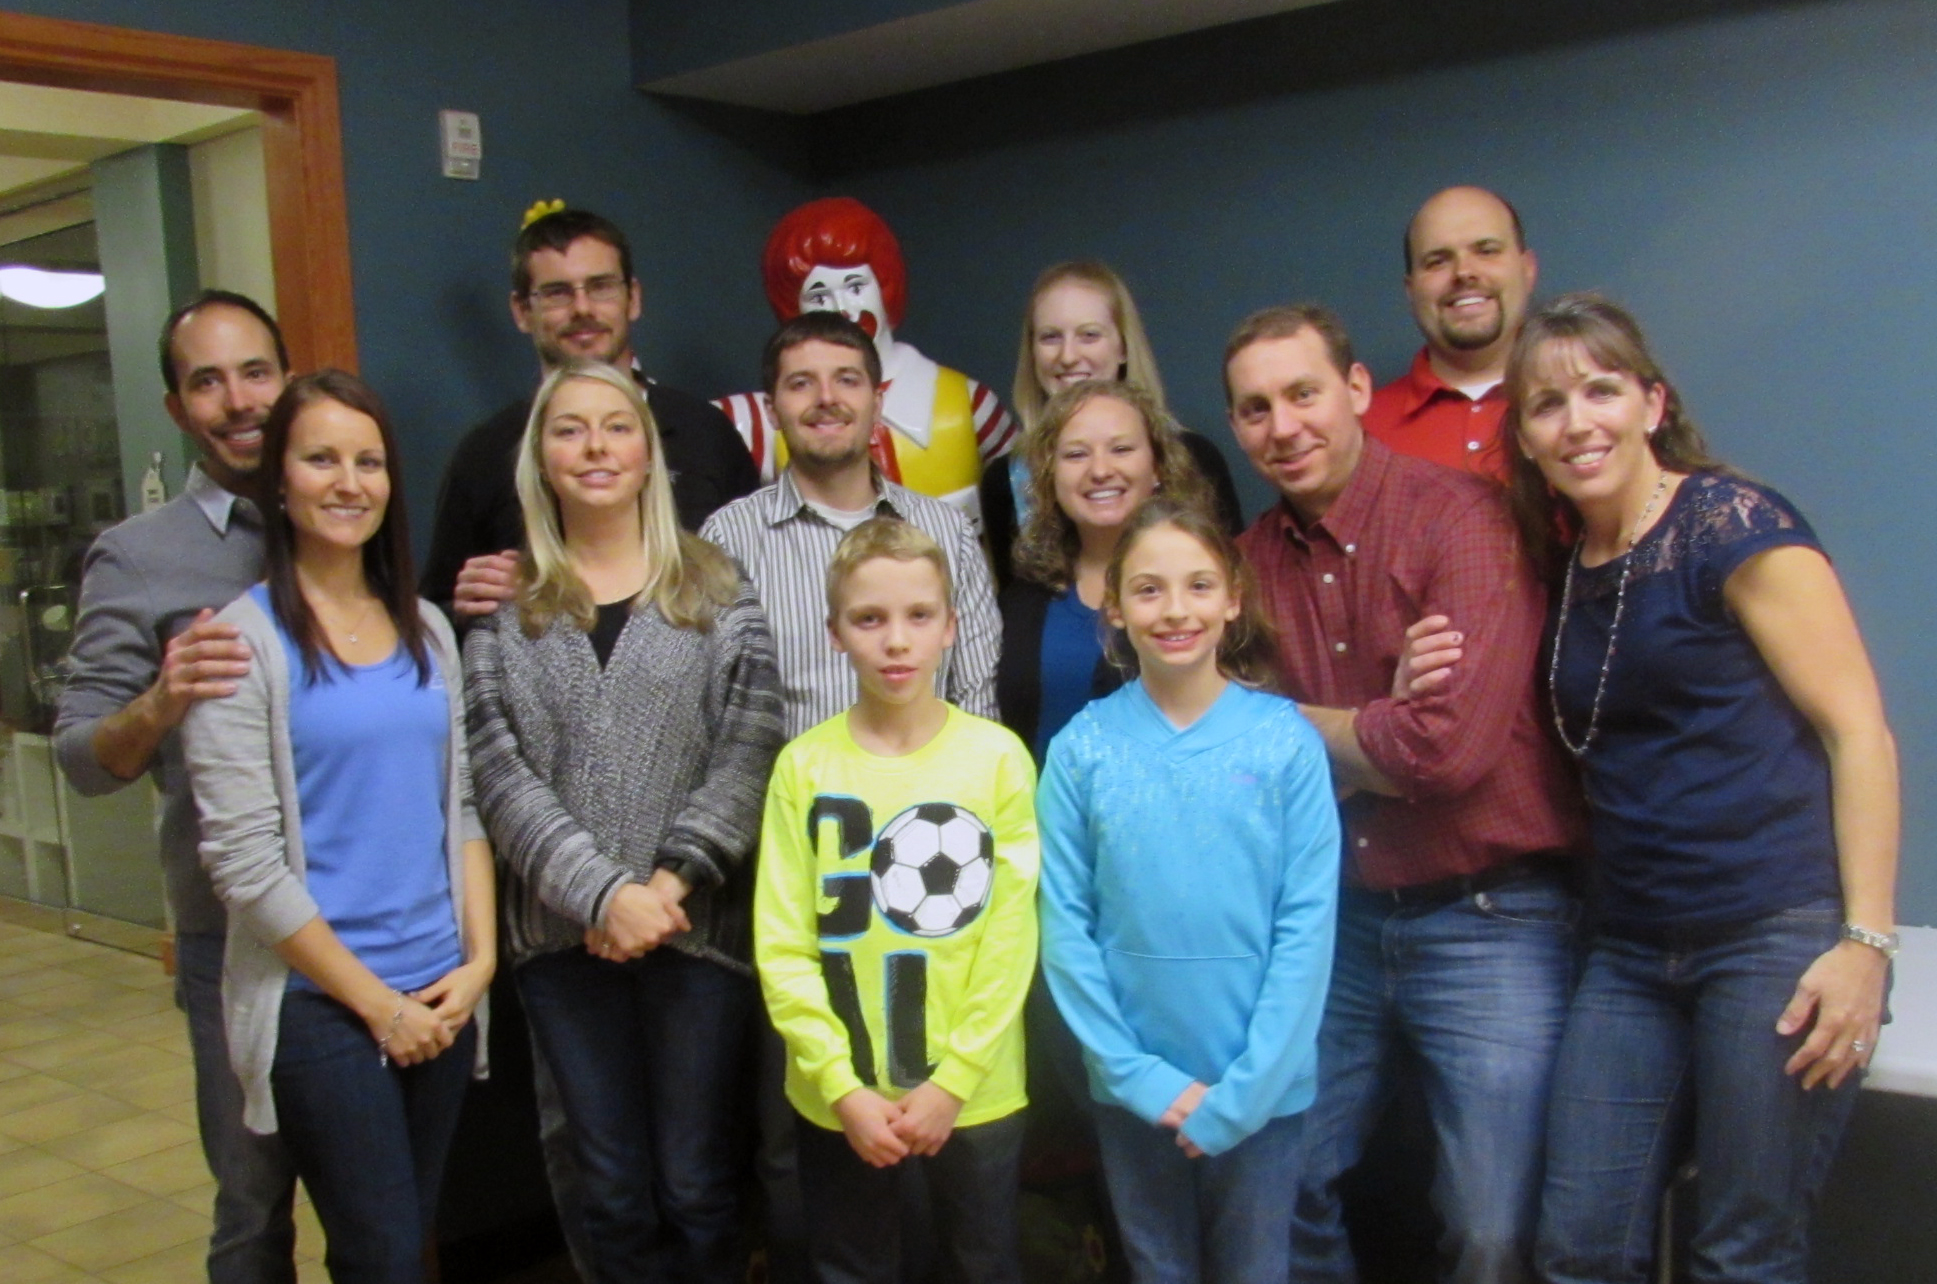 RMHC of Central Ohio